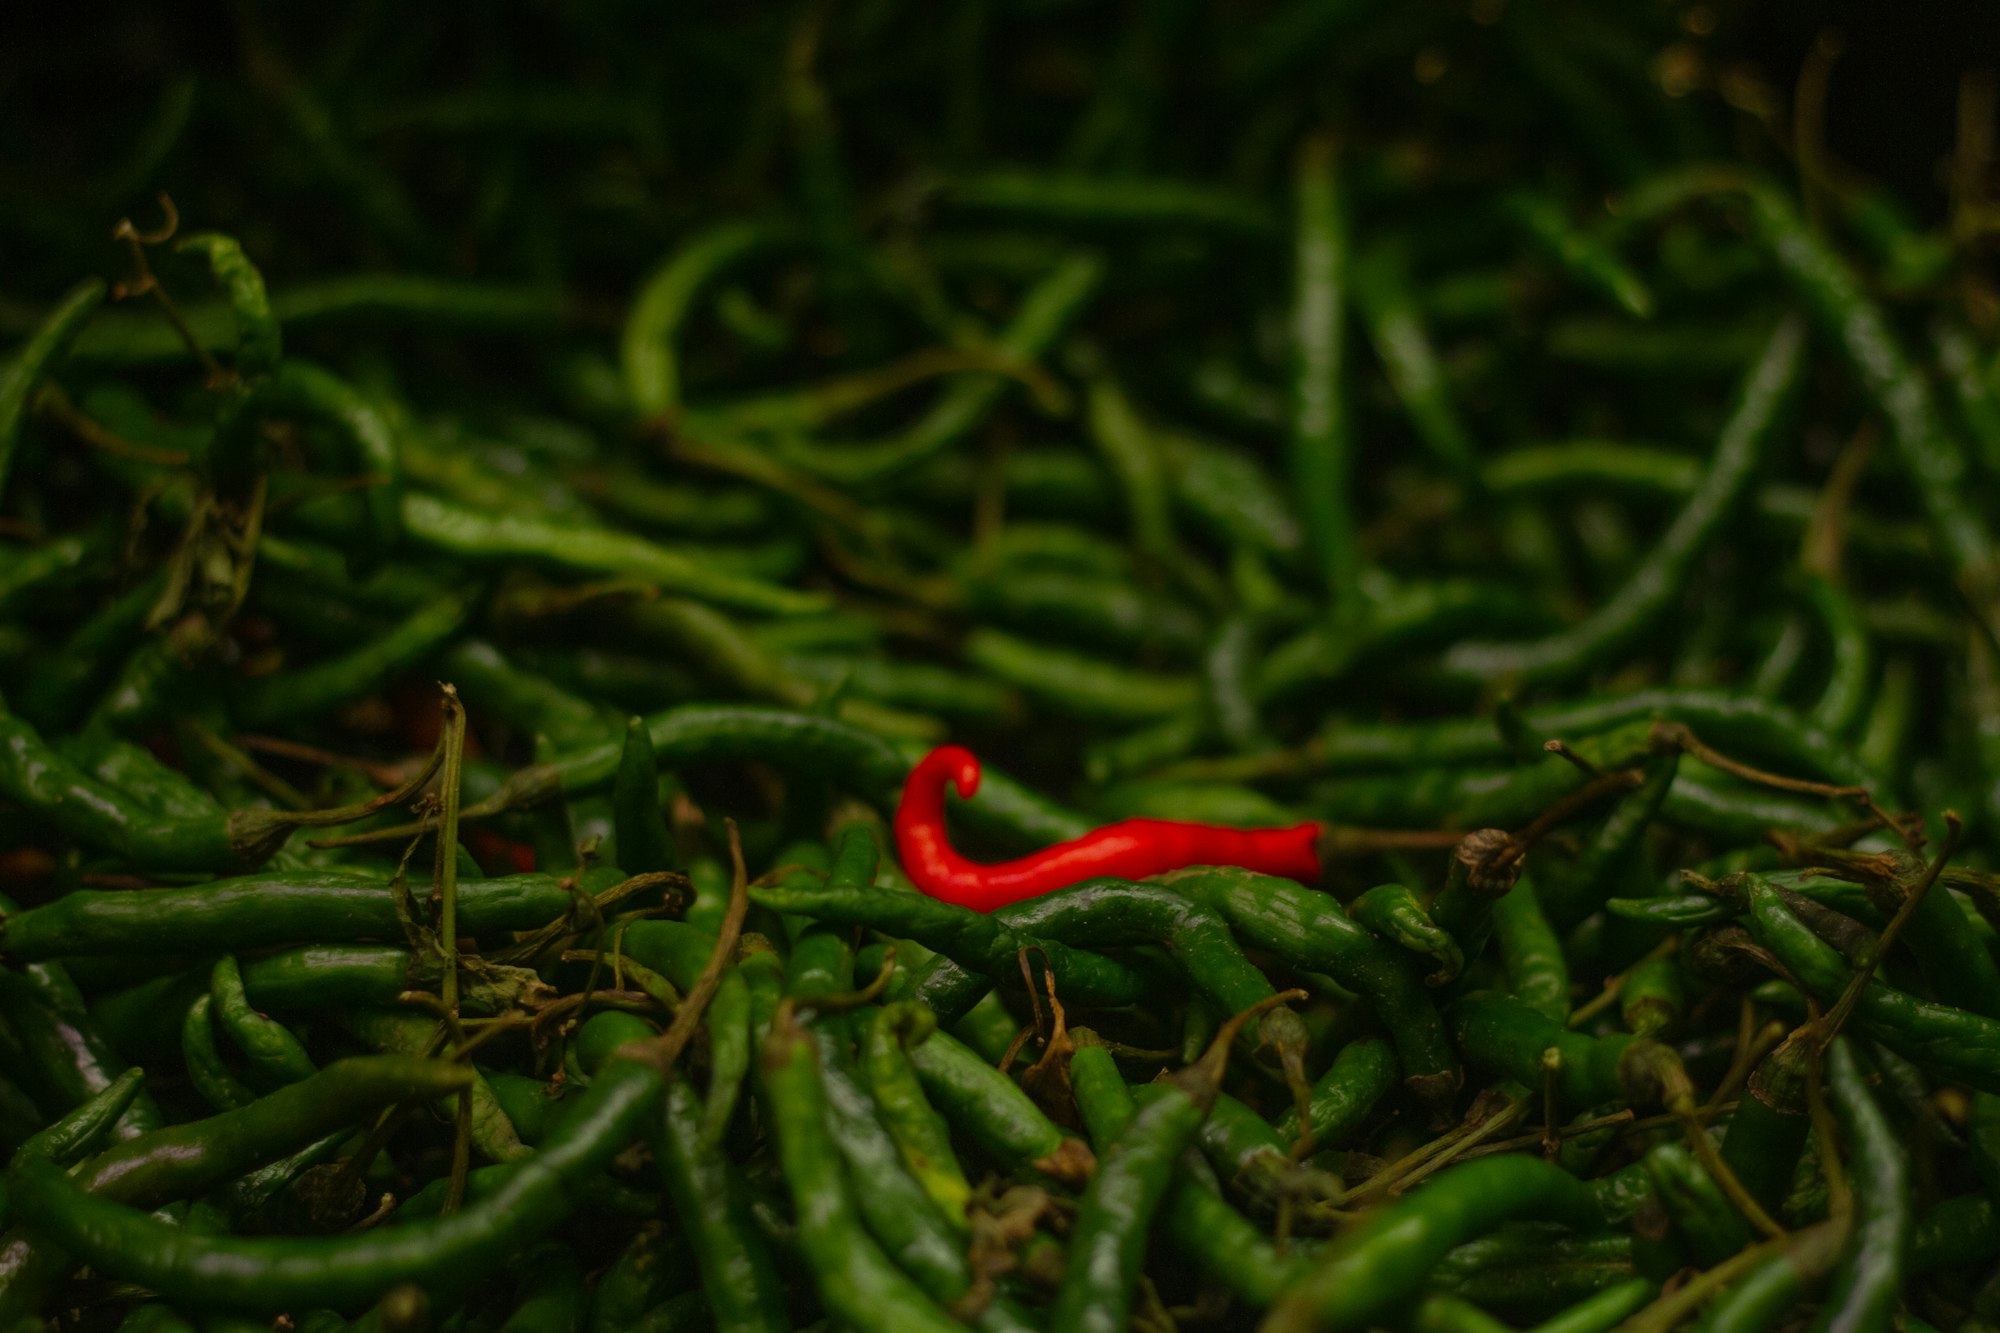 a red chili in a sea of green chilis